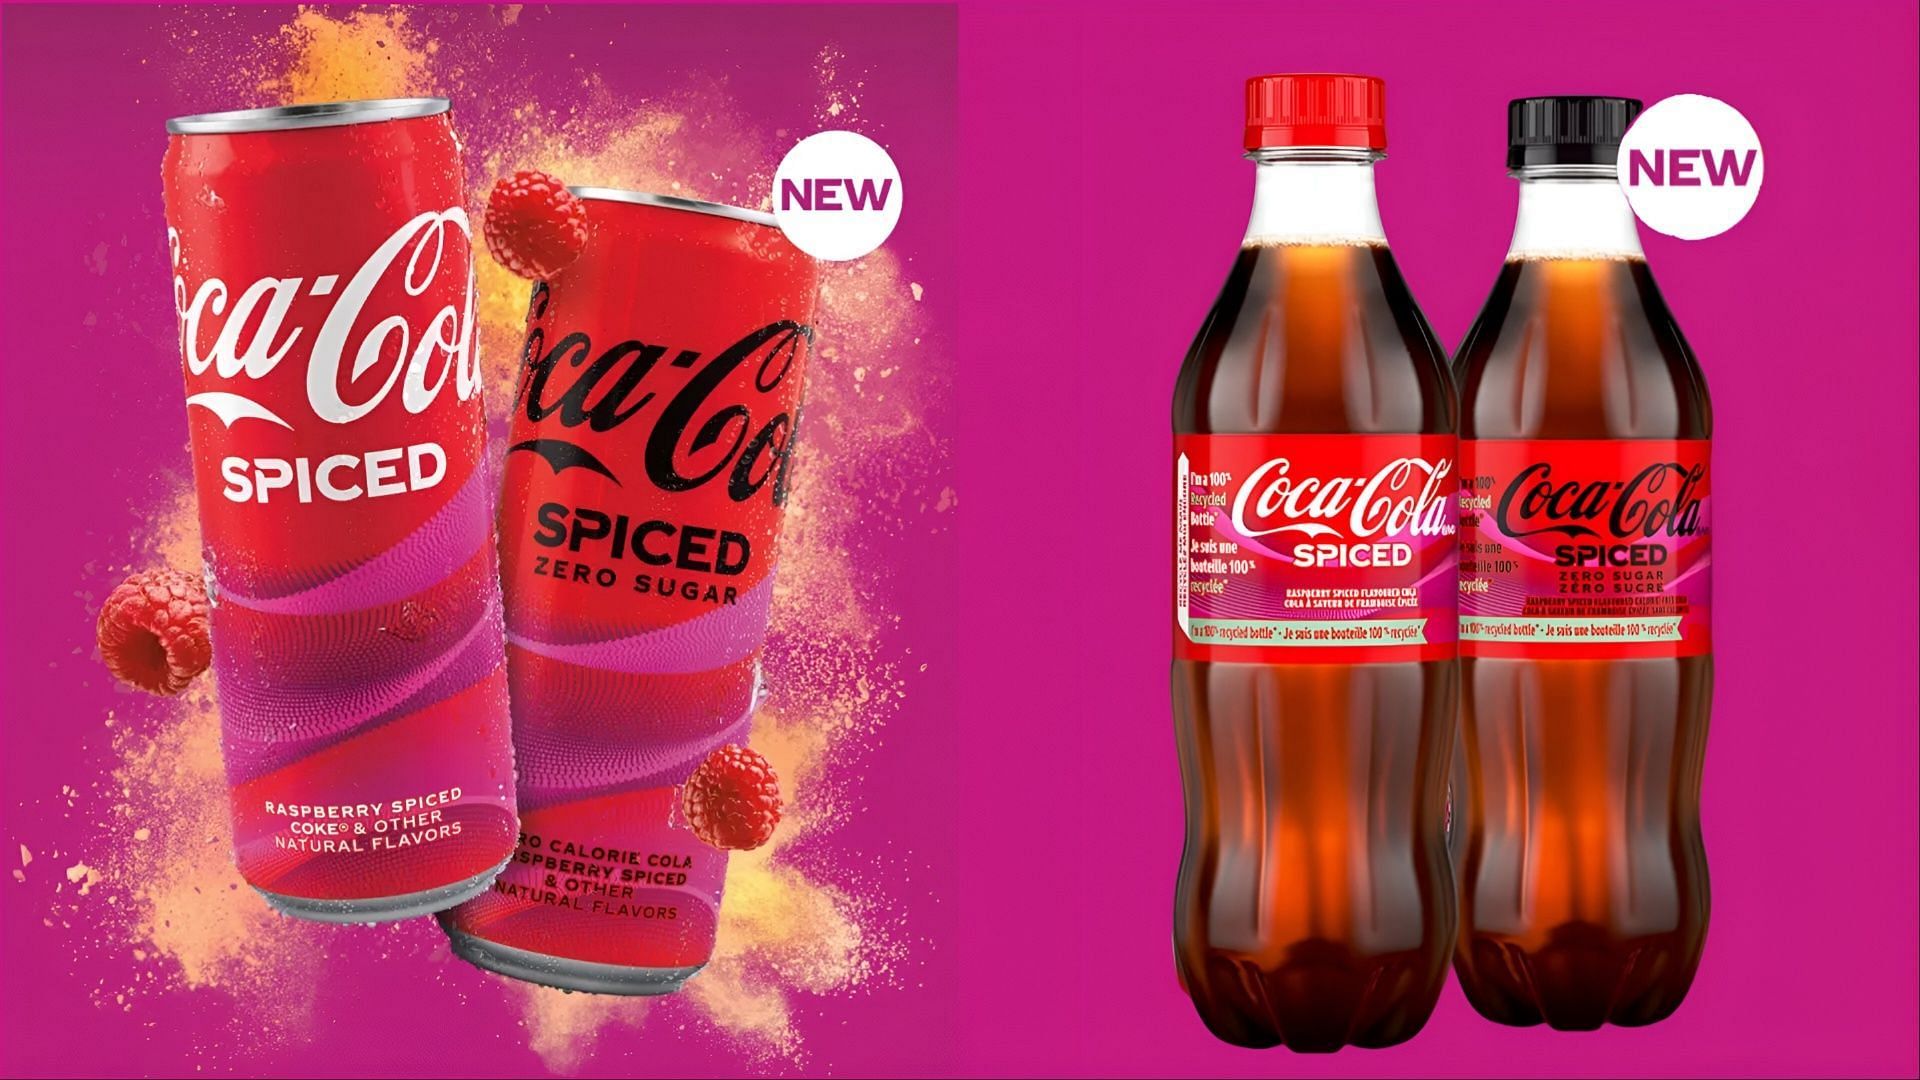 The new Spiced Coke will be available in the United States and Canada (Image via Coca-Cola)